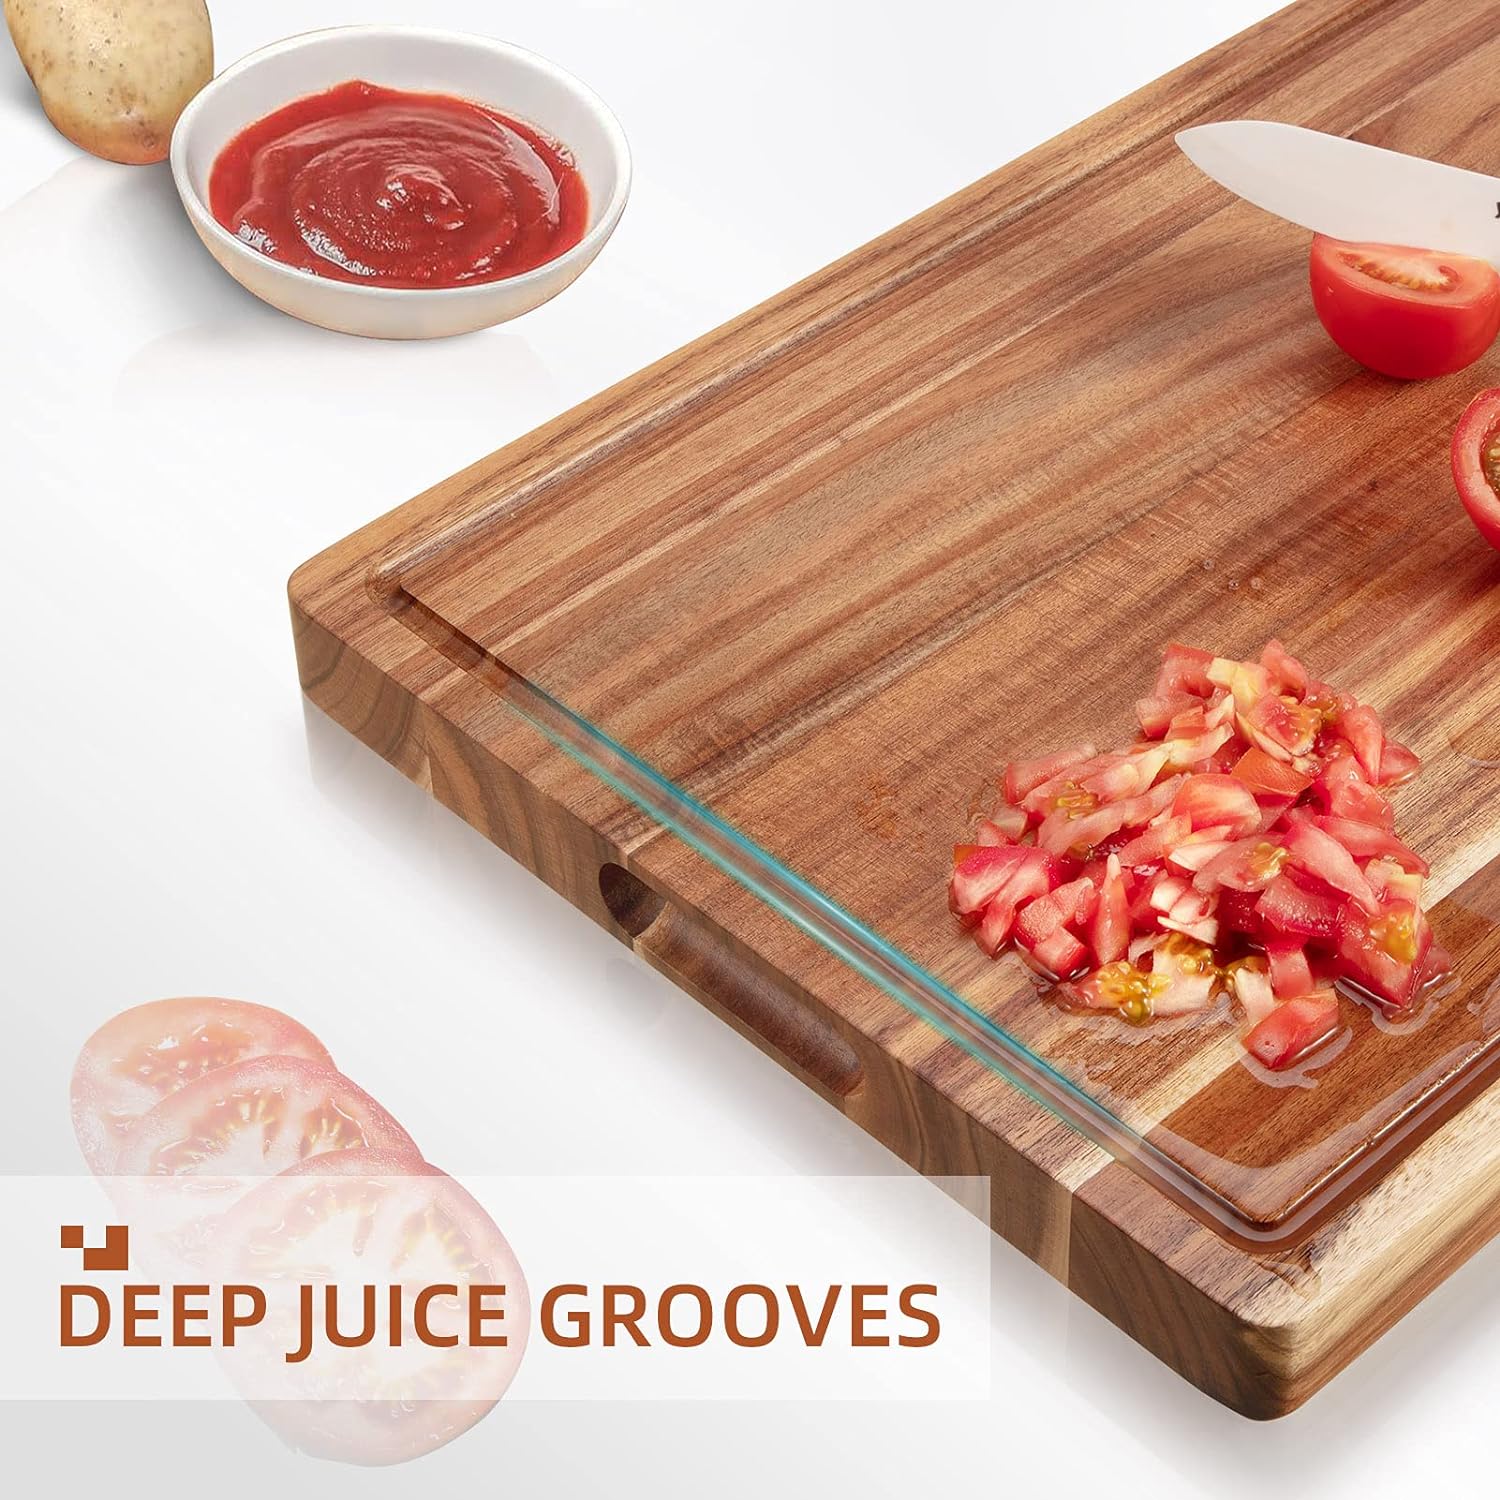 Extra Large Acacia Wood Cutting Board, 24x18", Reversible with Juice Groove, Butcher Block for Meat and Veggies - Boards / 20 x 15 x 1.5 Inch